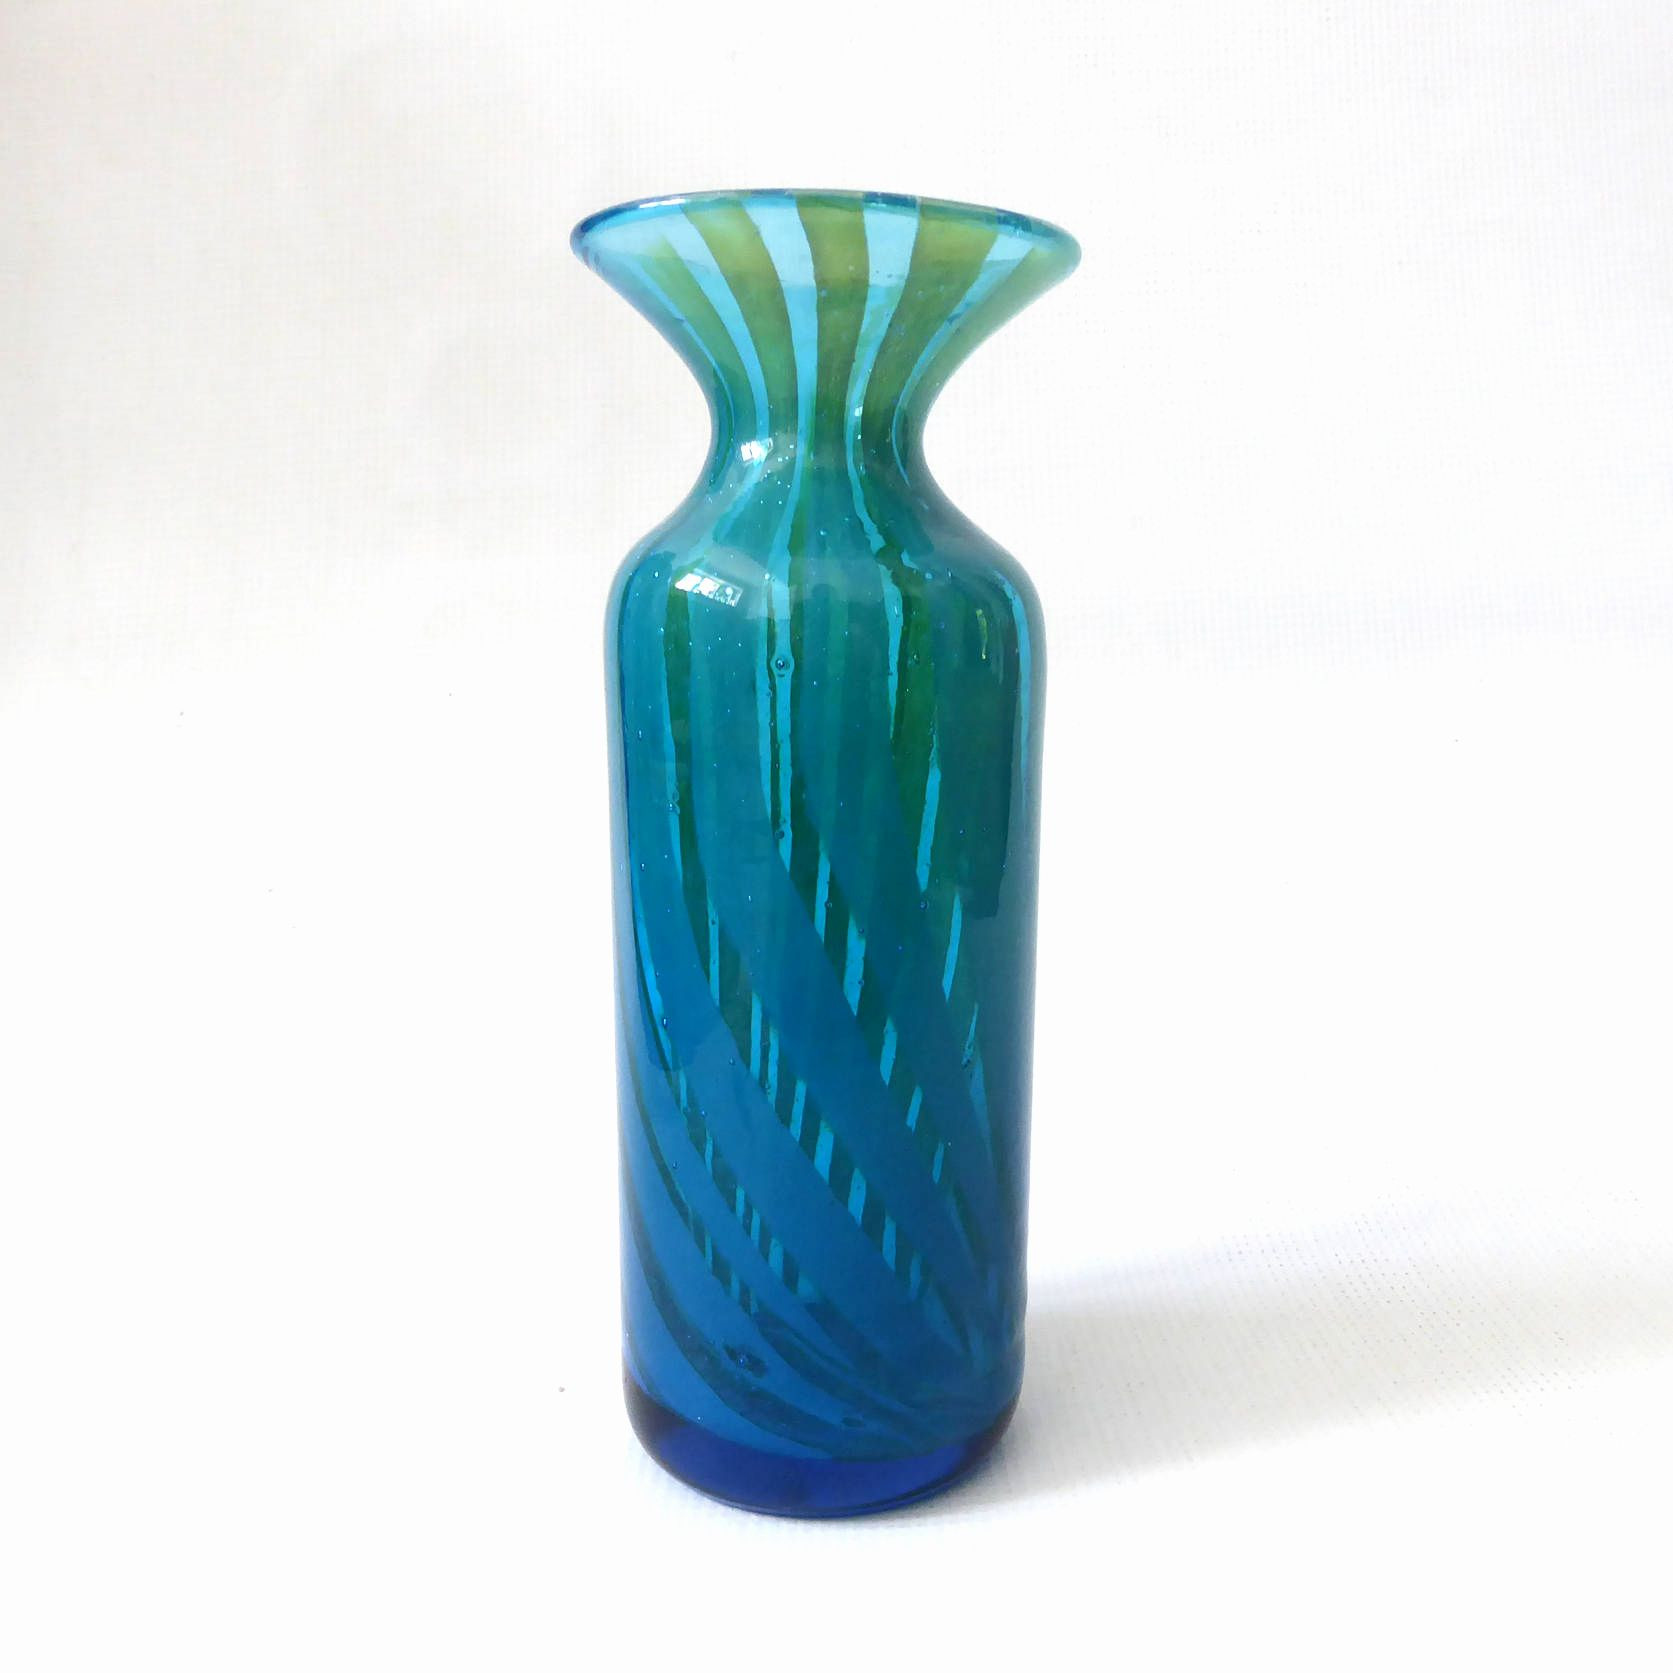 10 Spectacular Multi Colored Vases 2024 free download multi colored vases of 35 antique green glass vases the weekly world with regard to antique glass vases identify vase and cellar image avorcor